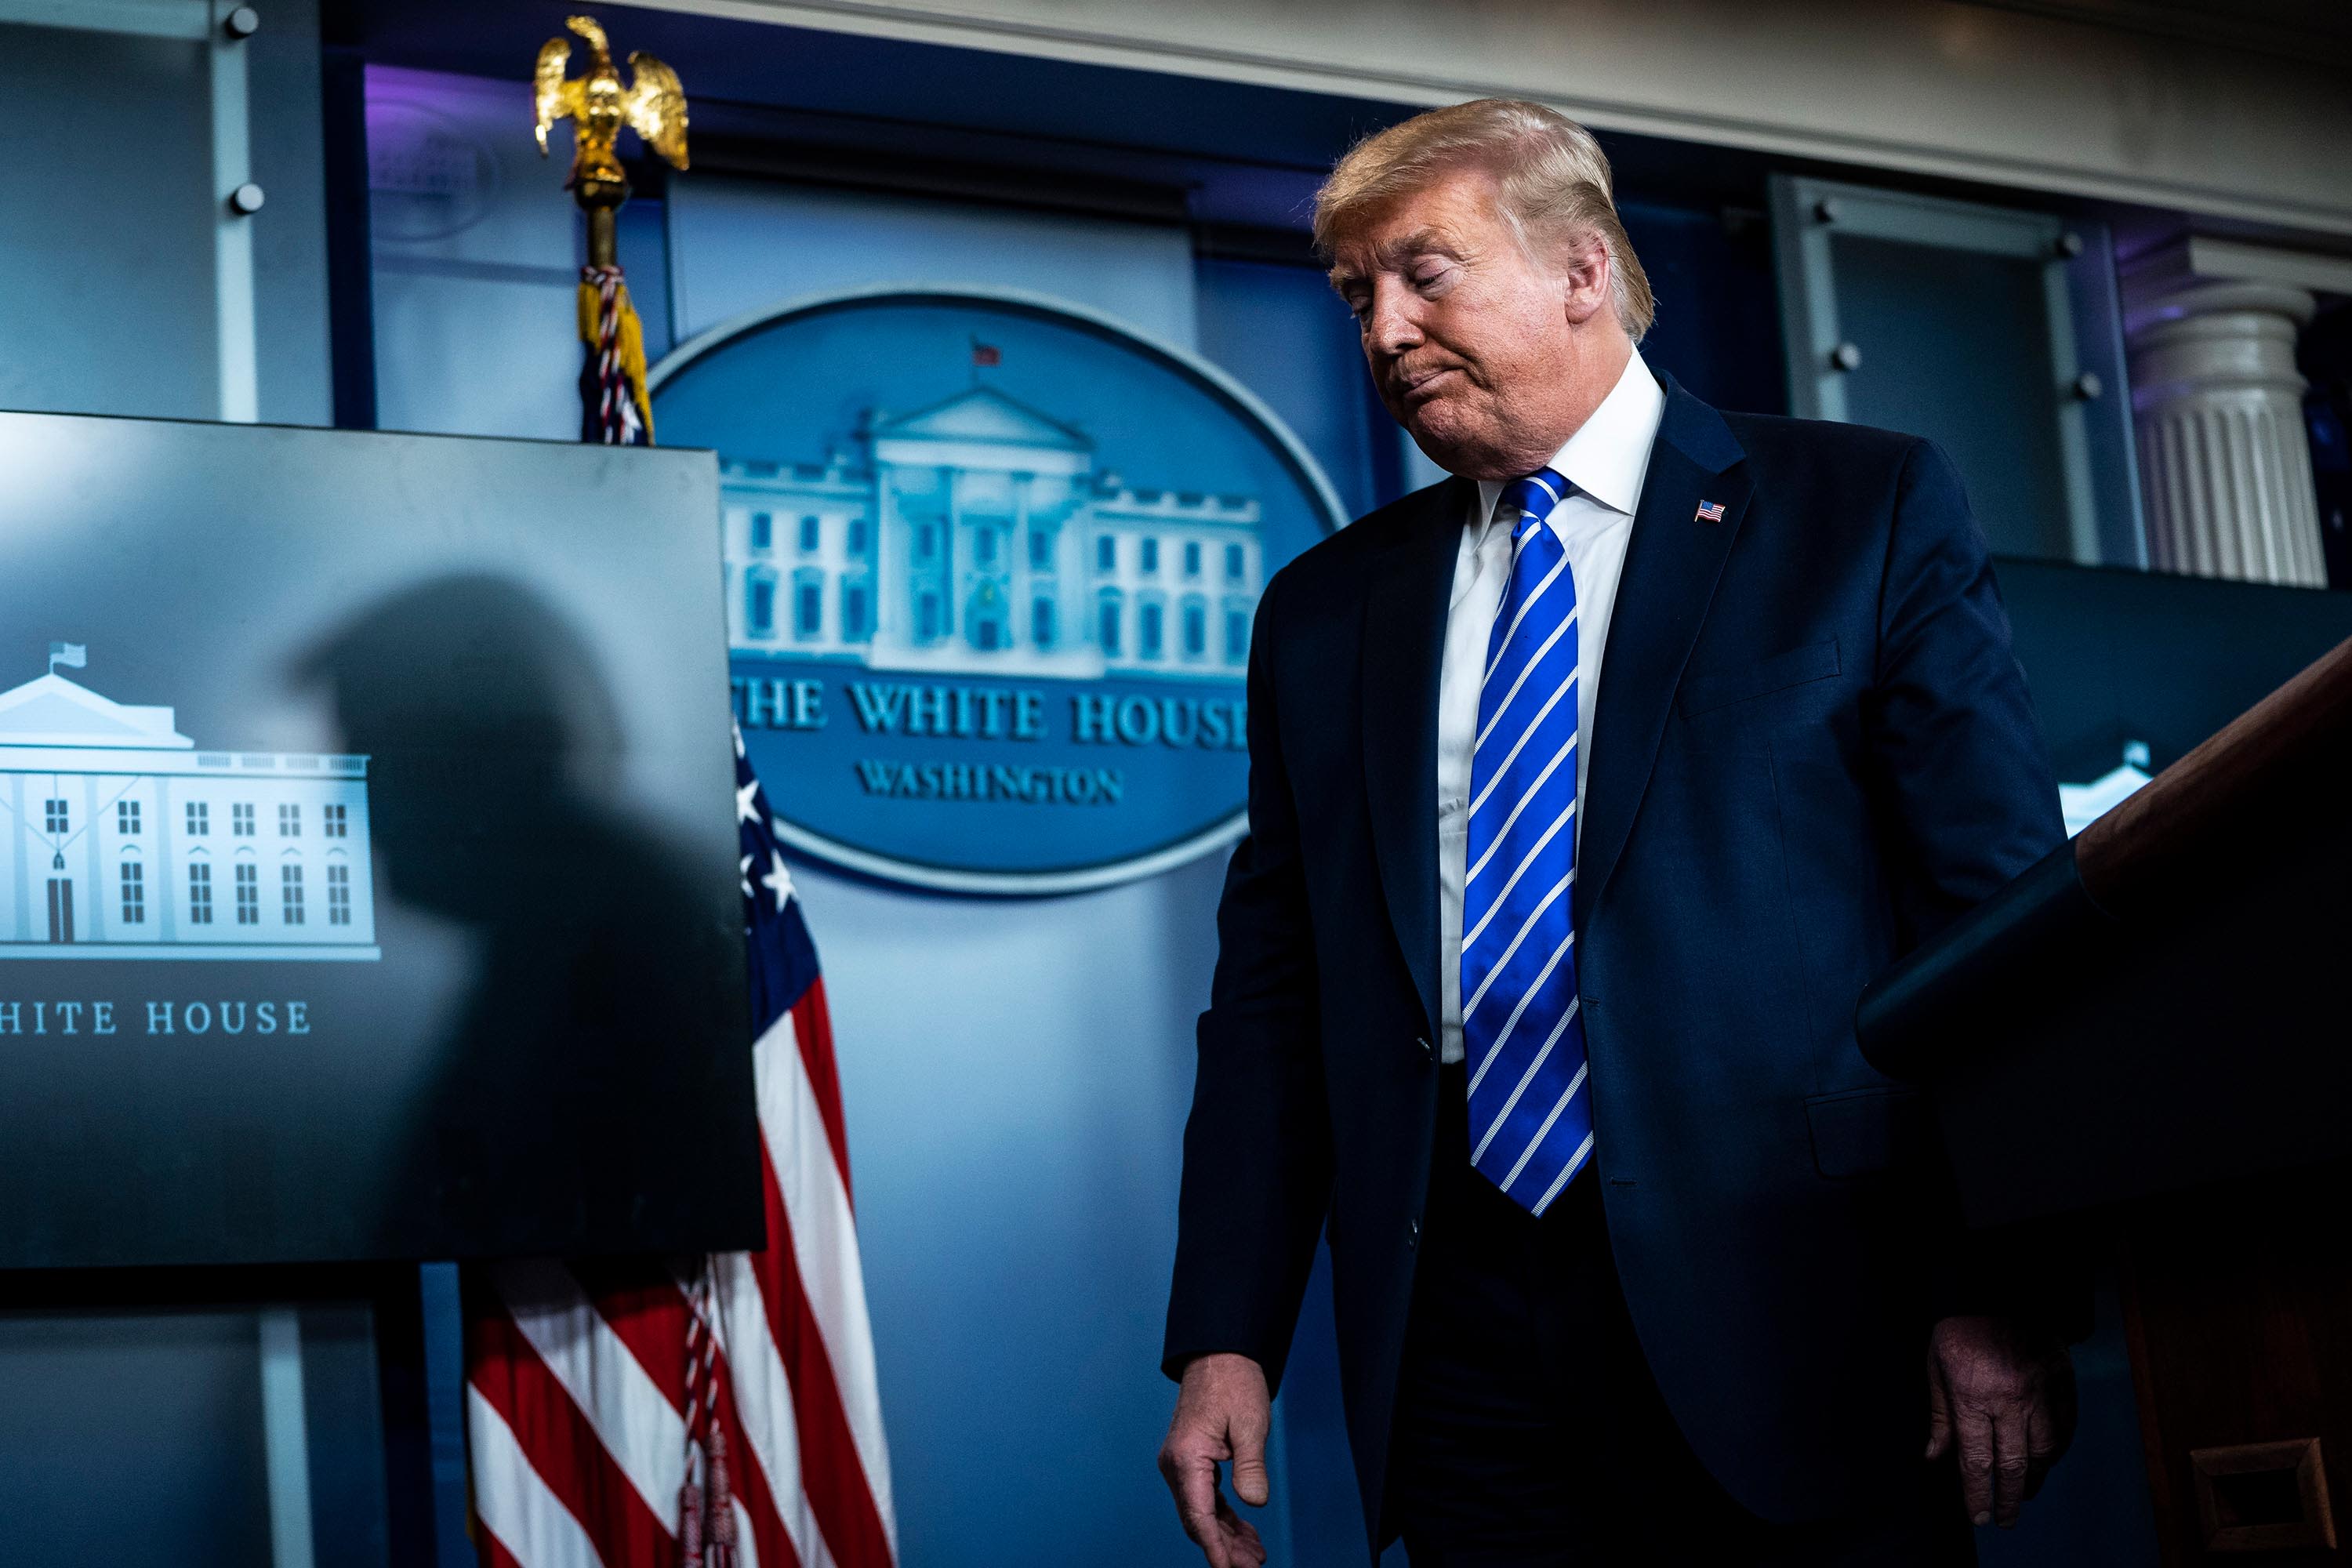 President Donald Trump leaves after the White House coronavirus briefing on April 23. During the briefing, Trump lashed out at reporters from CNN and The Washington Post who asked him questions, saying they were "fake news." It was also <a href="https://www.cnn.com/2020/04/24/politics/fact-check-trump-disinfectant-sarcastic/index.html" target="_blank">at this briefing</a> when Trump asked medical experts to look into the possibility of injecting disinfectant as a treatment for the coronavirus. He said later he was being sarcastic.